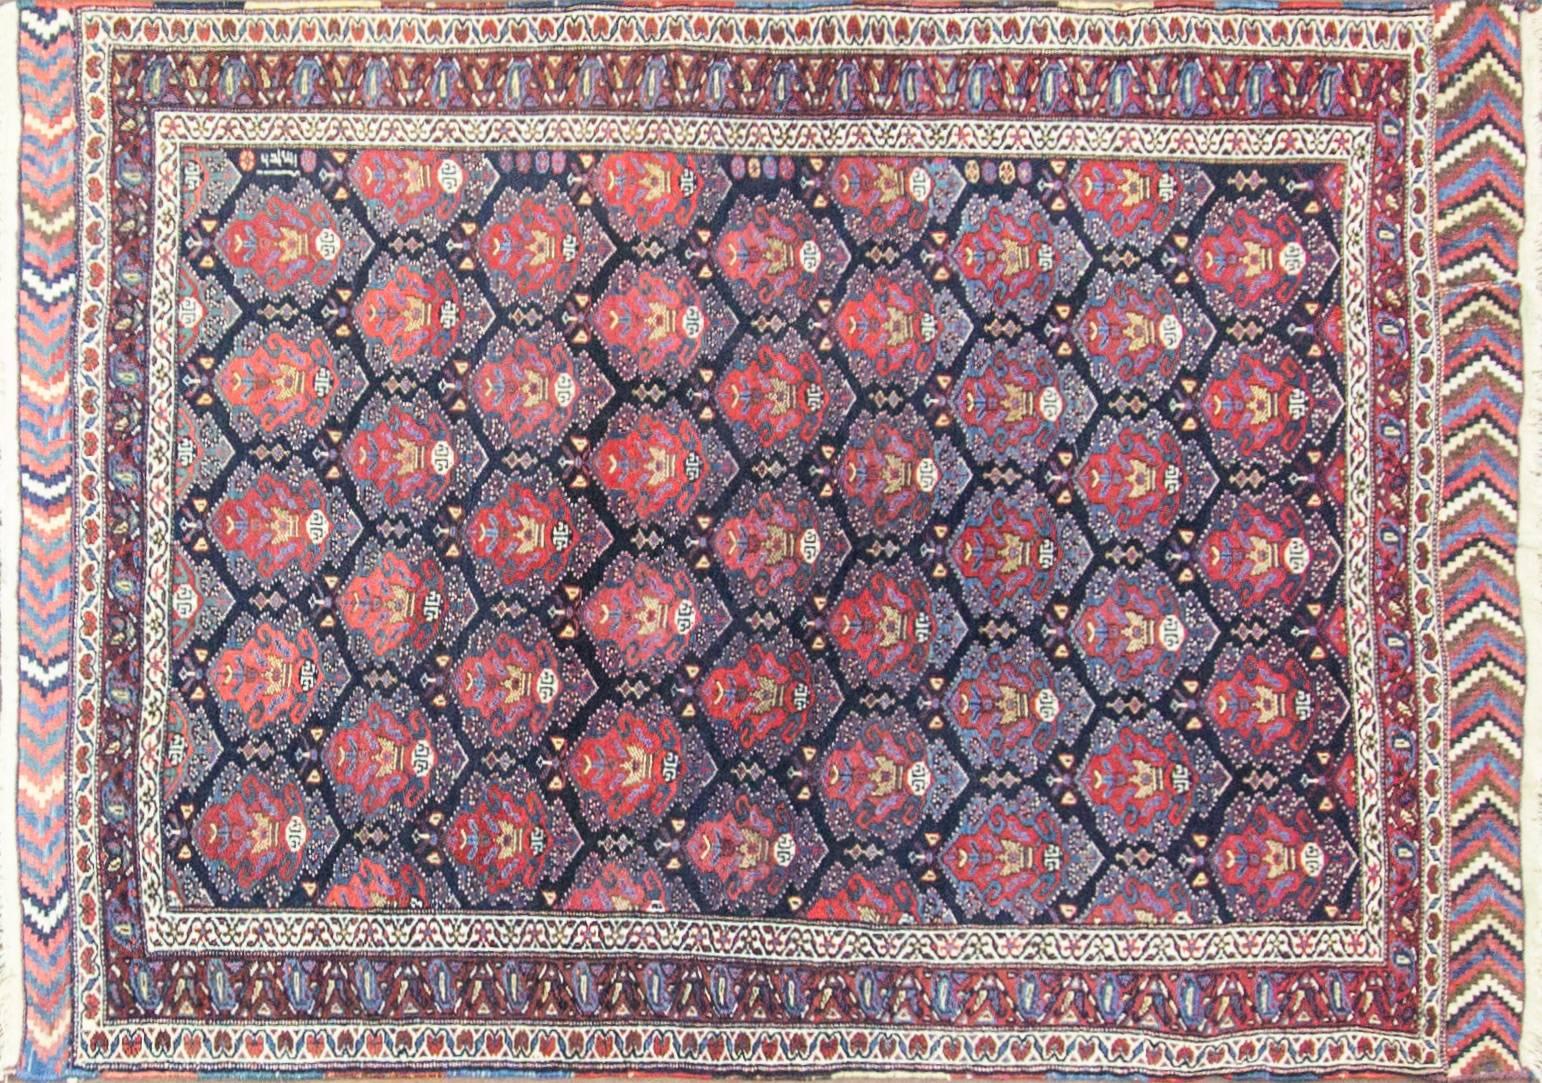 Gerous was formerly a designation for Bidjar carpets in Northwest Persia as well as the name of Kurdish Sub tribe of the area. 
Dated and all-over crown design rug with vegetable dyed wool on wool foundation. 
Beautiful colorful Kilim baft on two